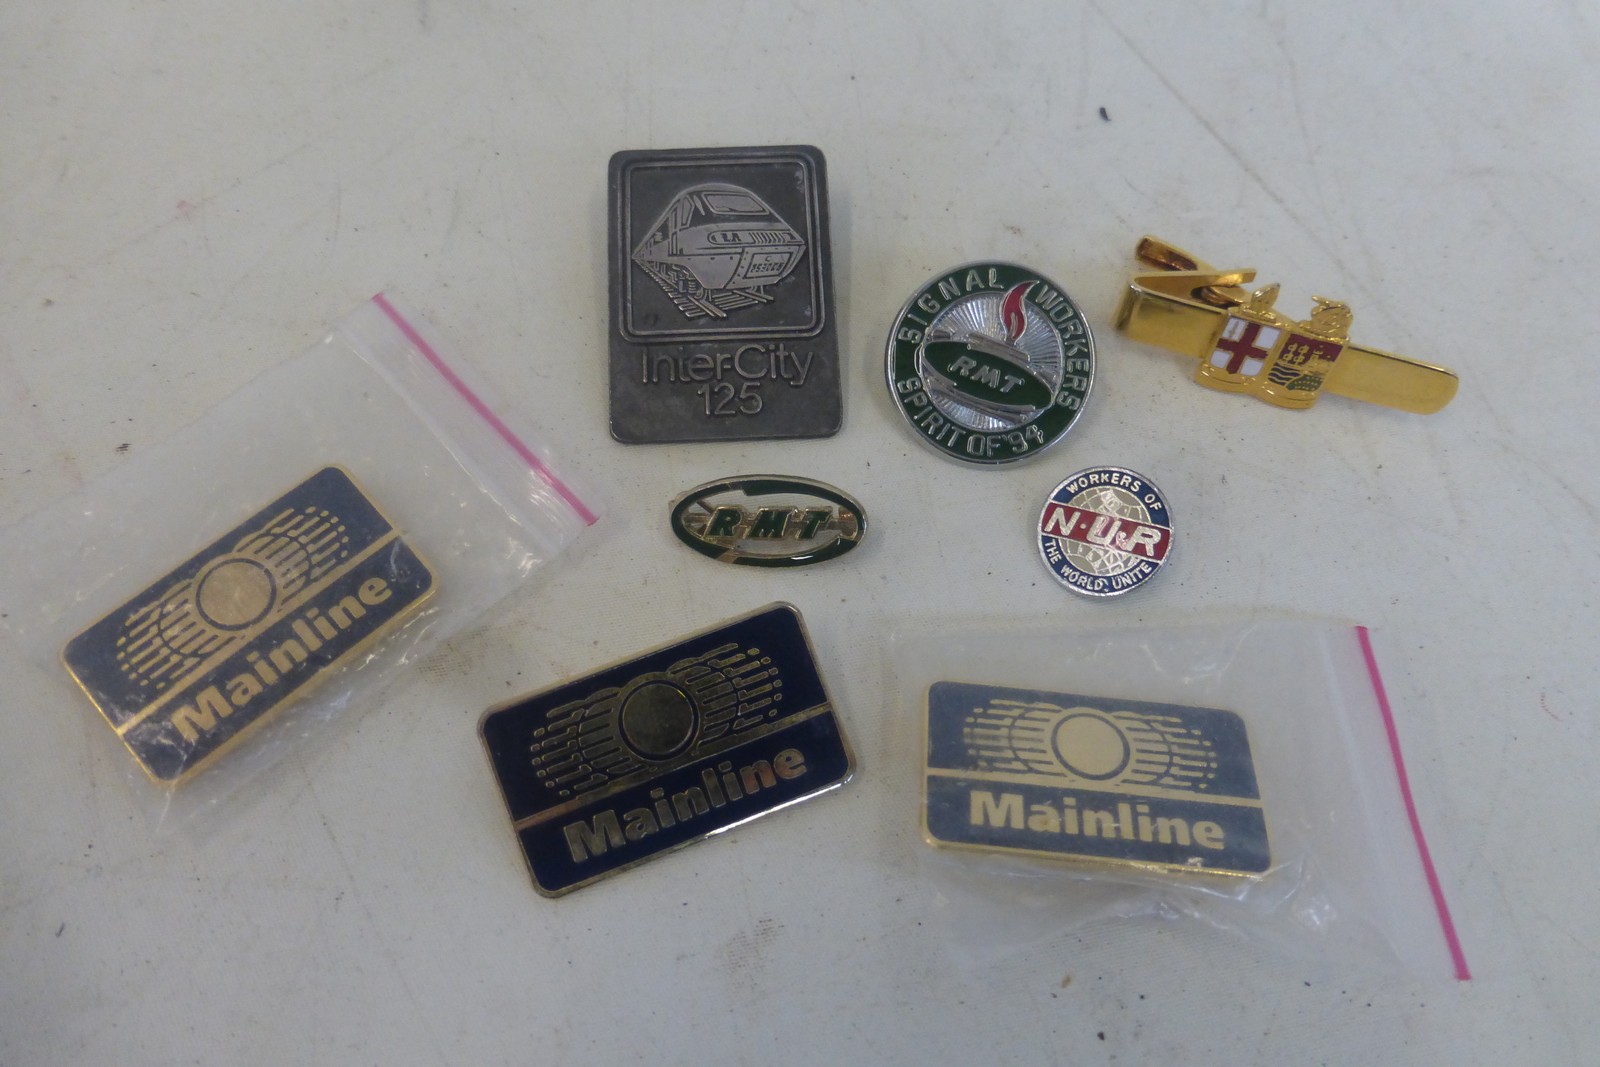 A collection of eight railway badges including three Mainline and an Inter-City 125 badge issued